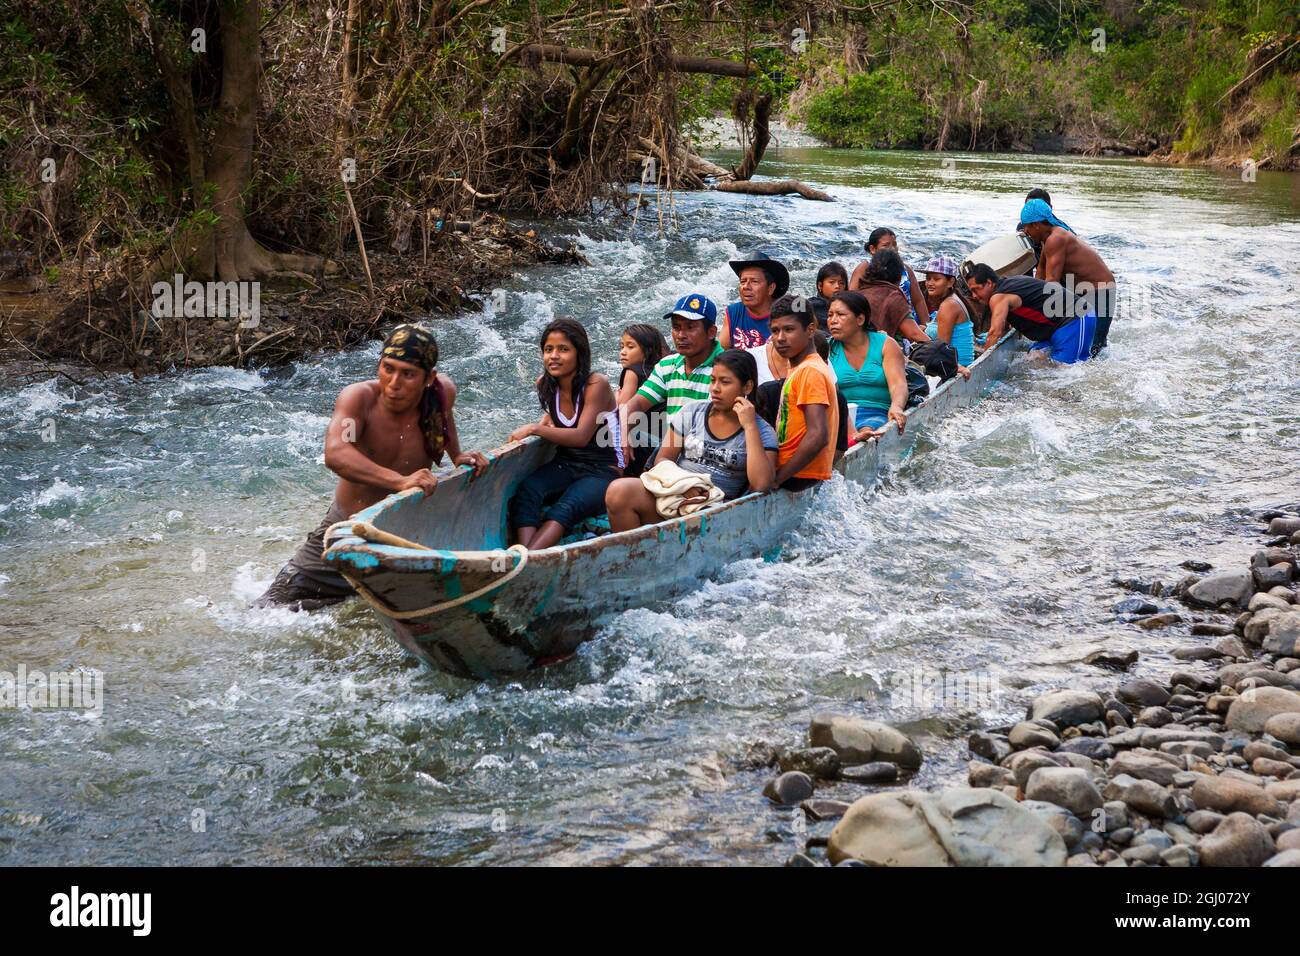 Panamanian people traveling downstream Rio Pequeni in a boat, Chagres national park, Republic of Panama, Central America. Stock Photo